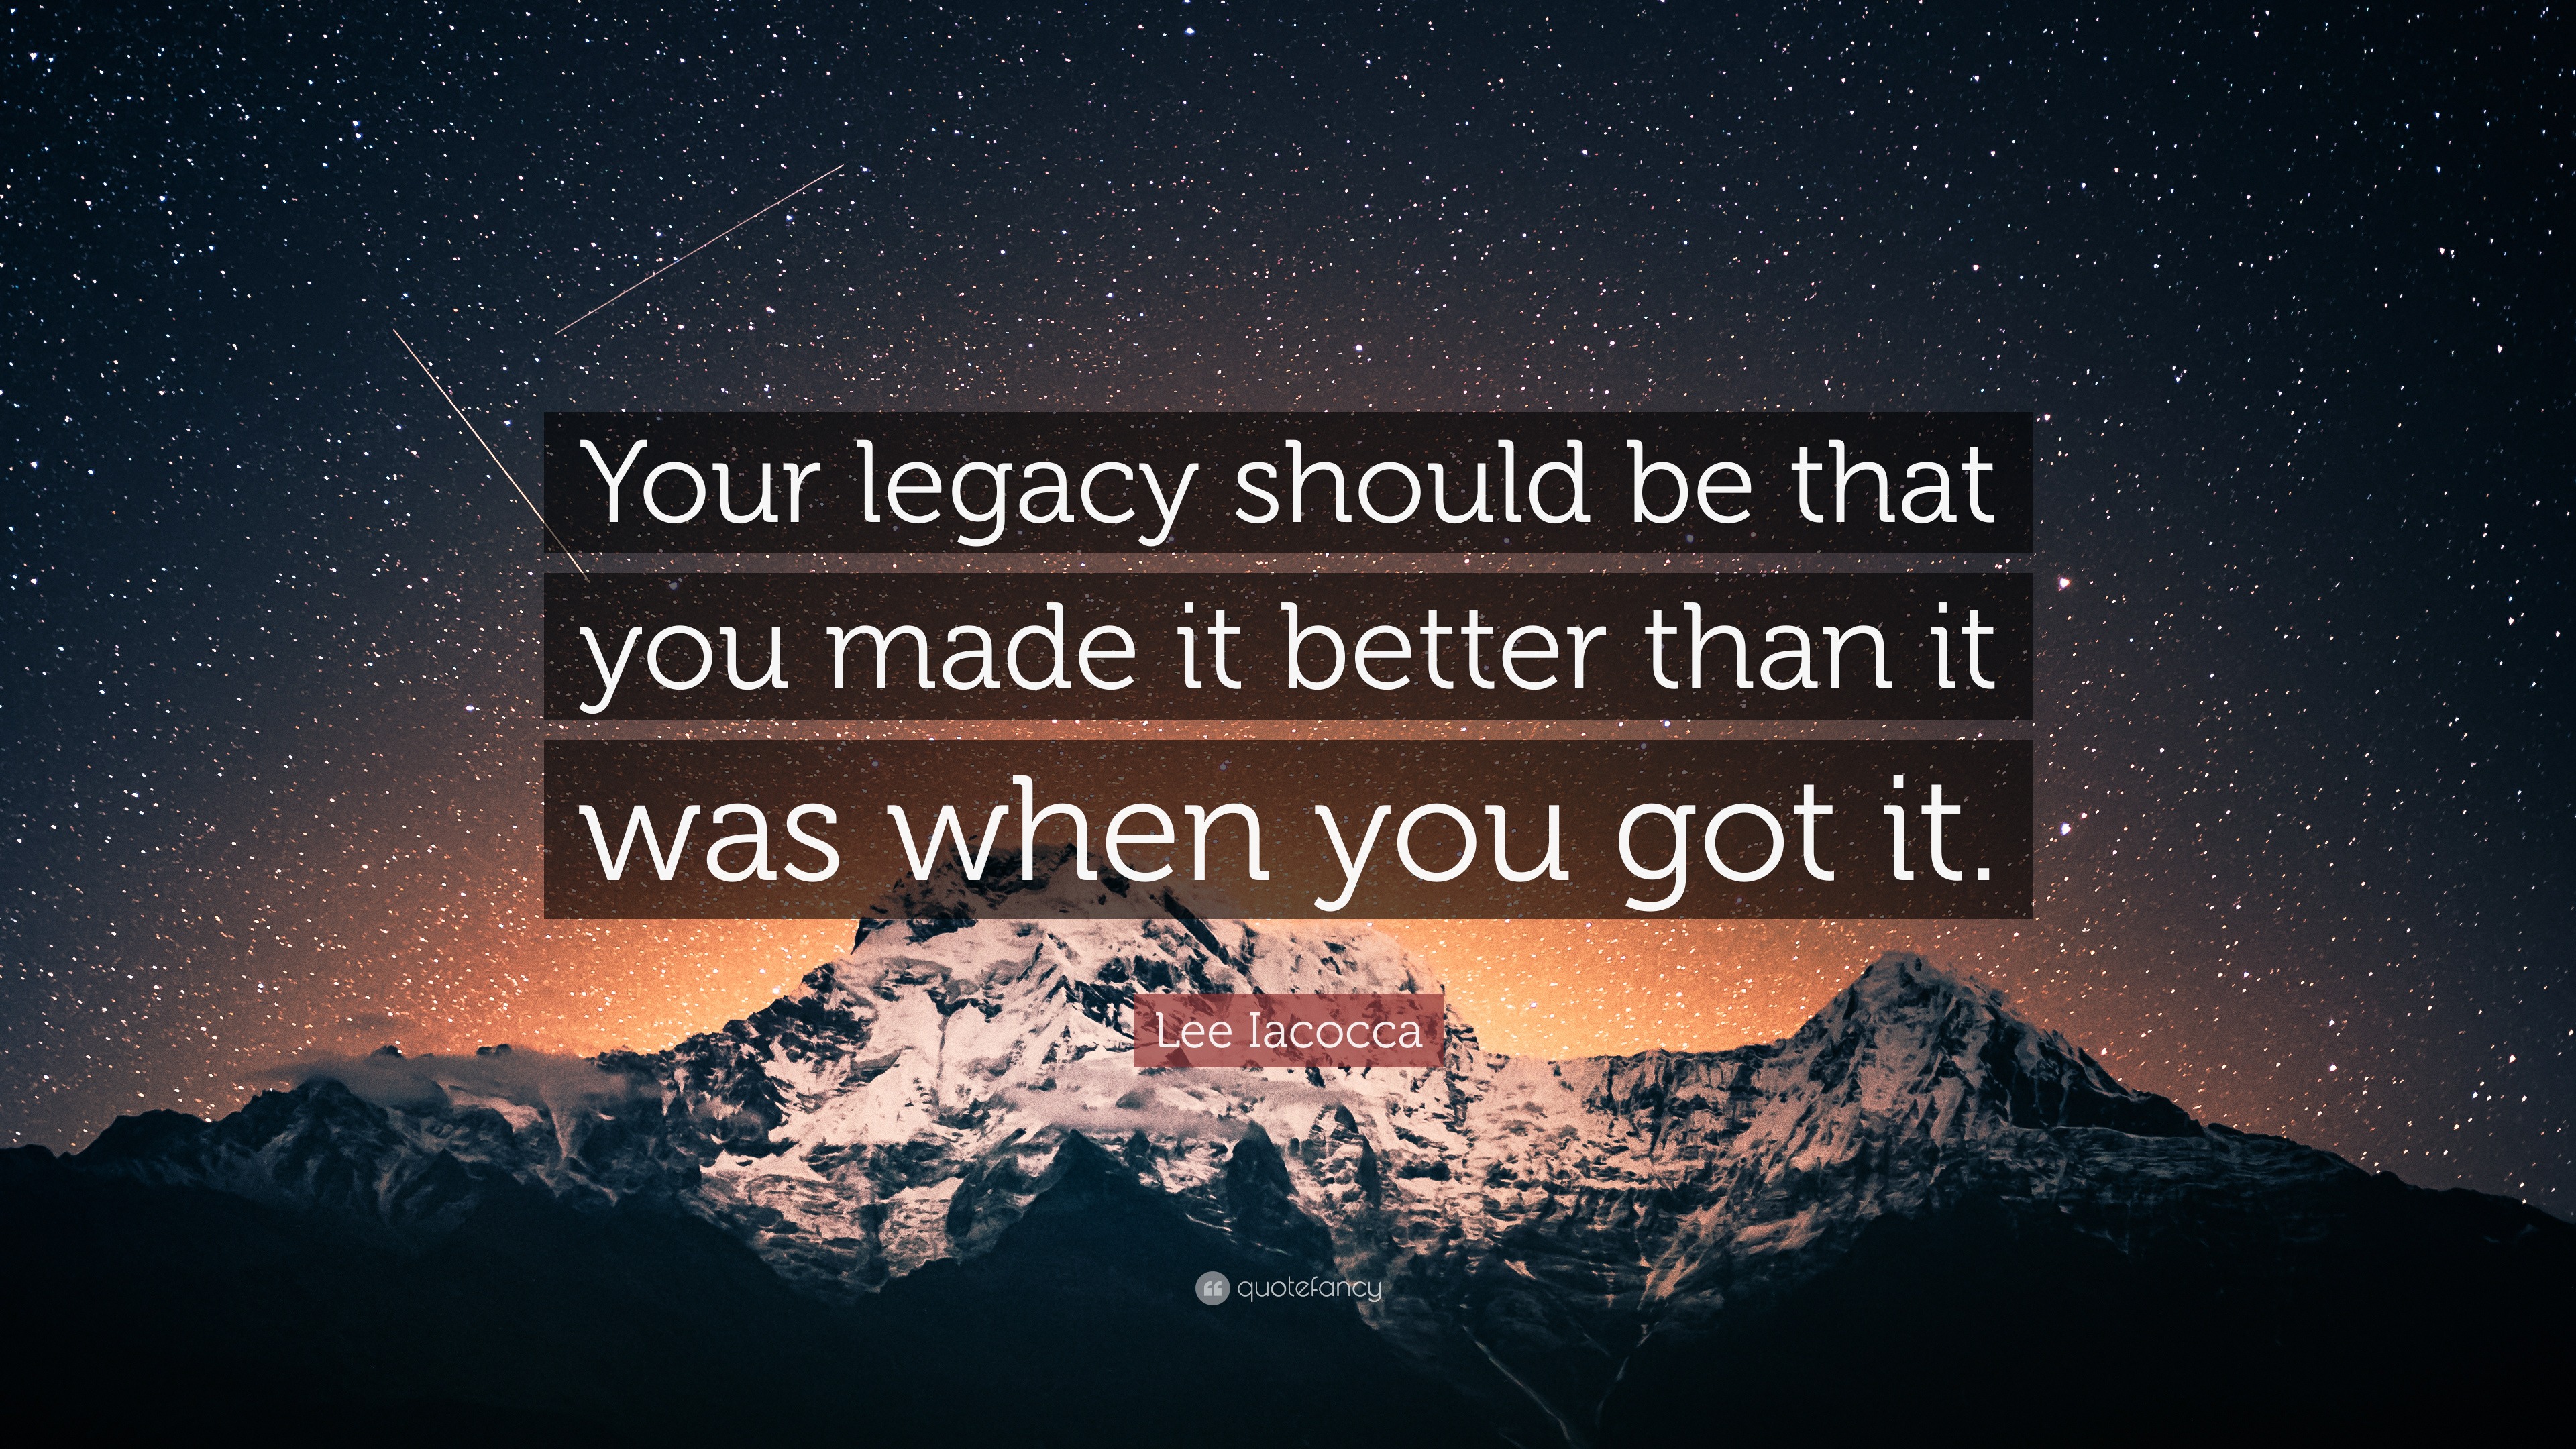 Lee Iacocca Quote: “Your legacy should be that you made it better